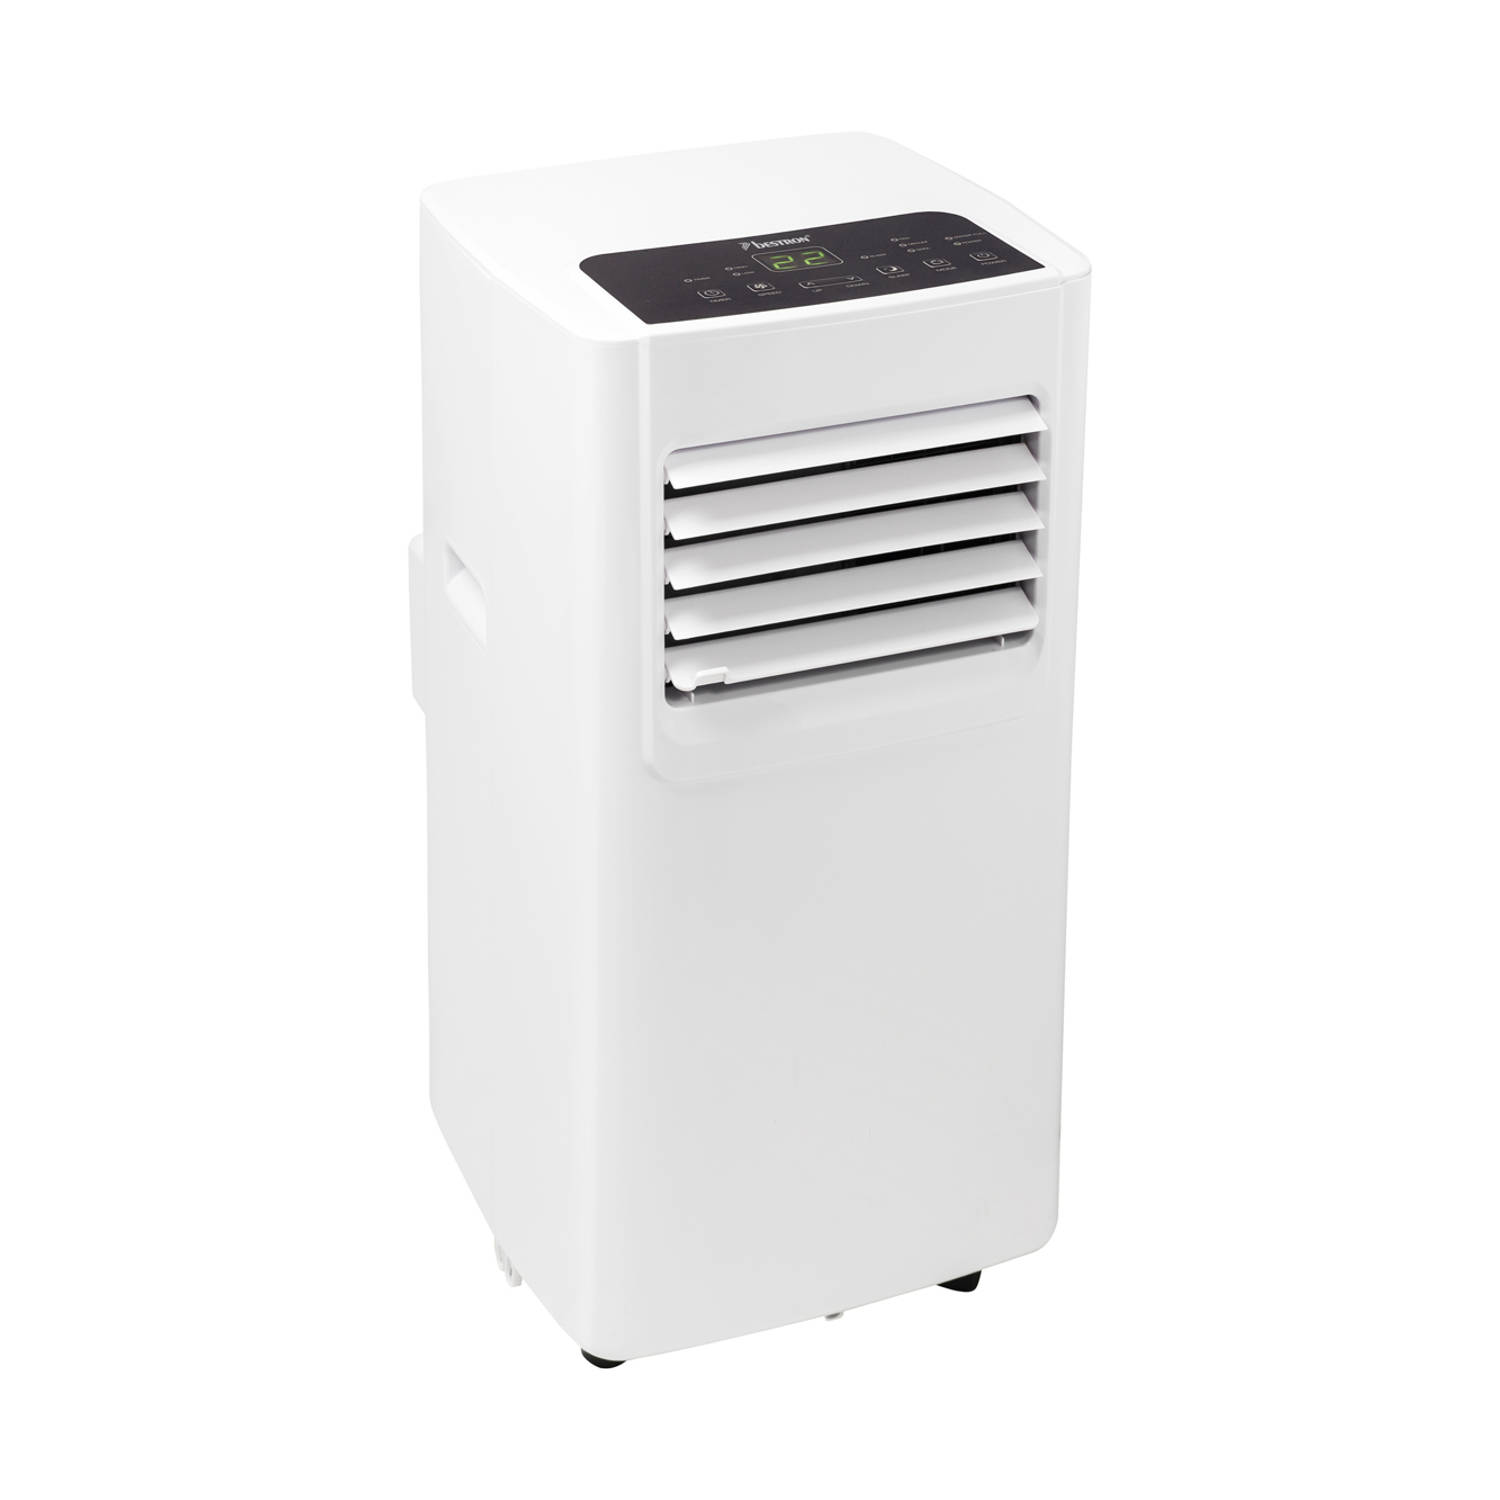 Bestron Aac7000 Airconditioners – Wit